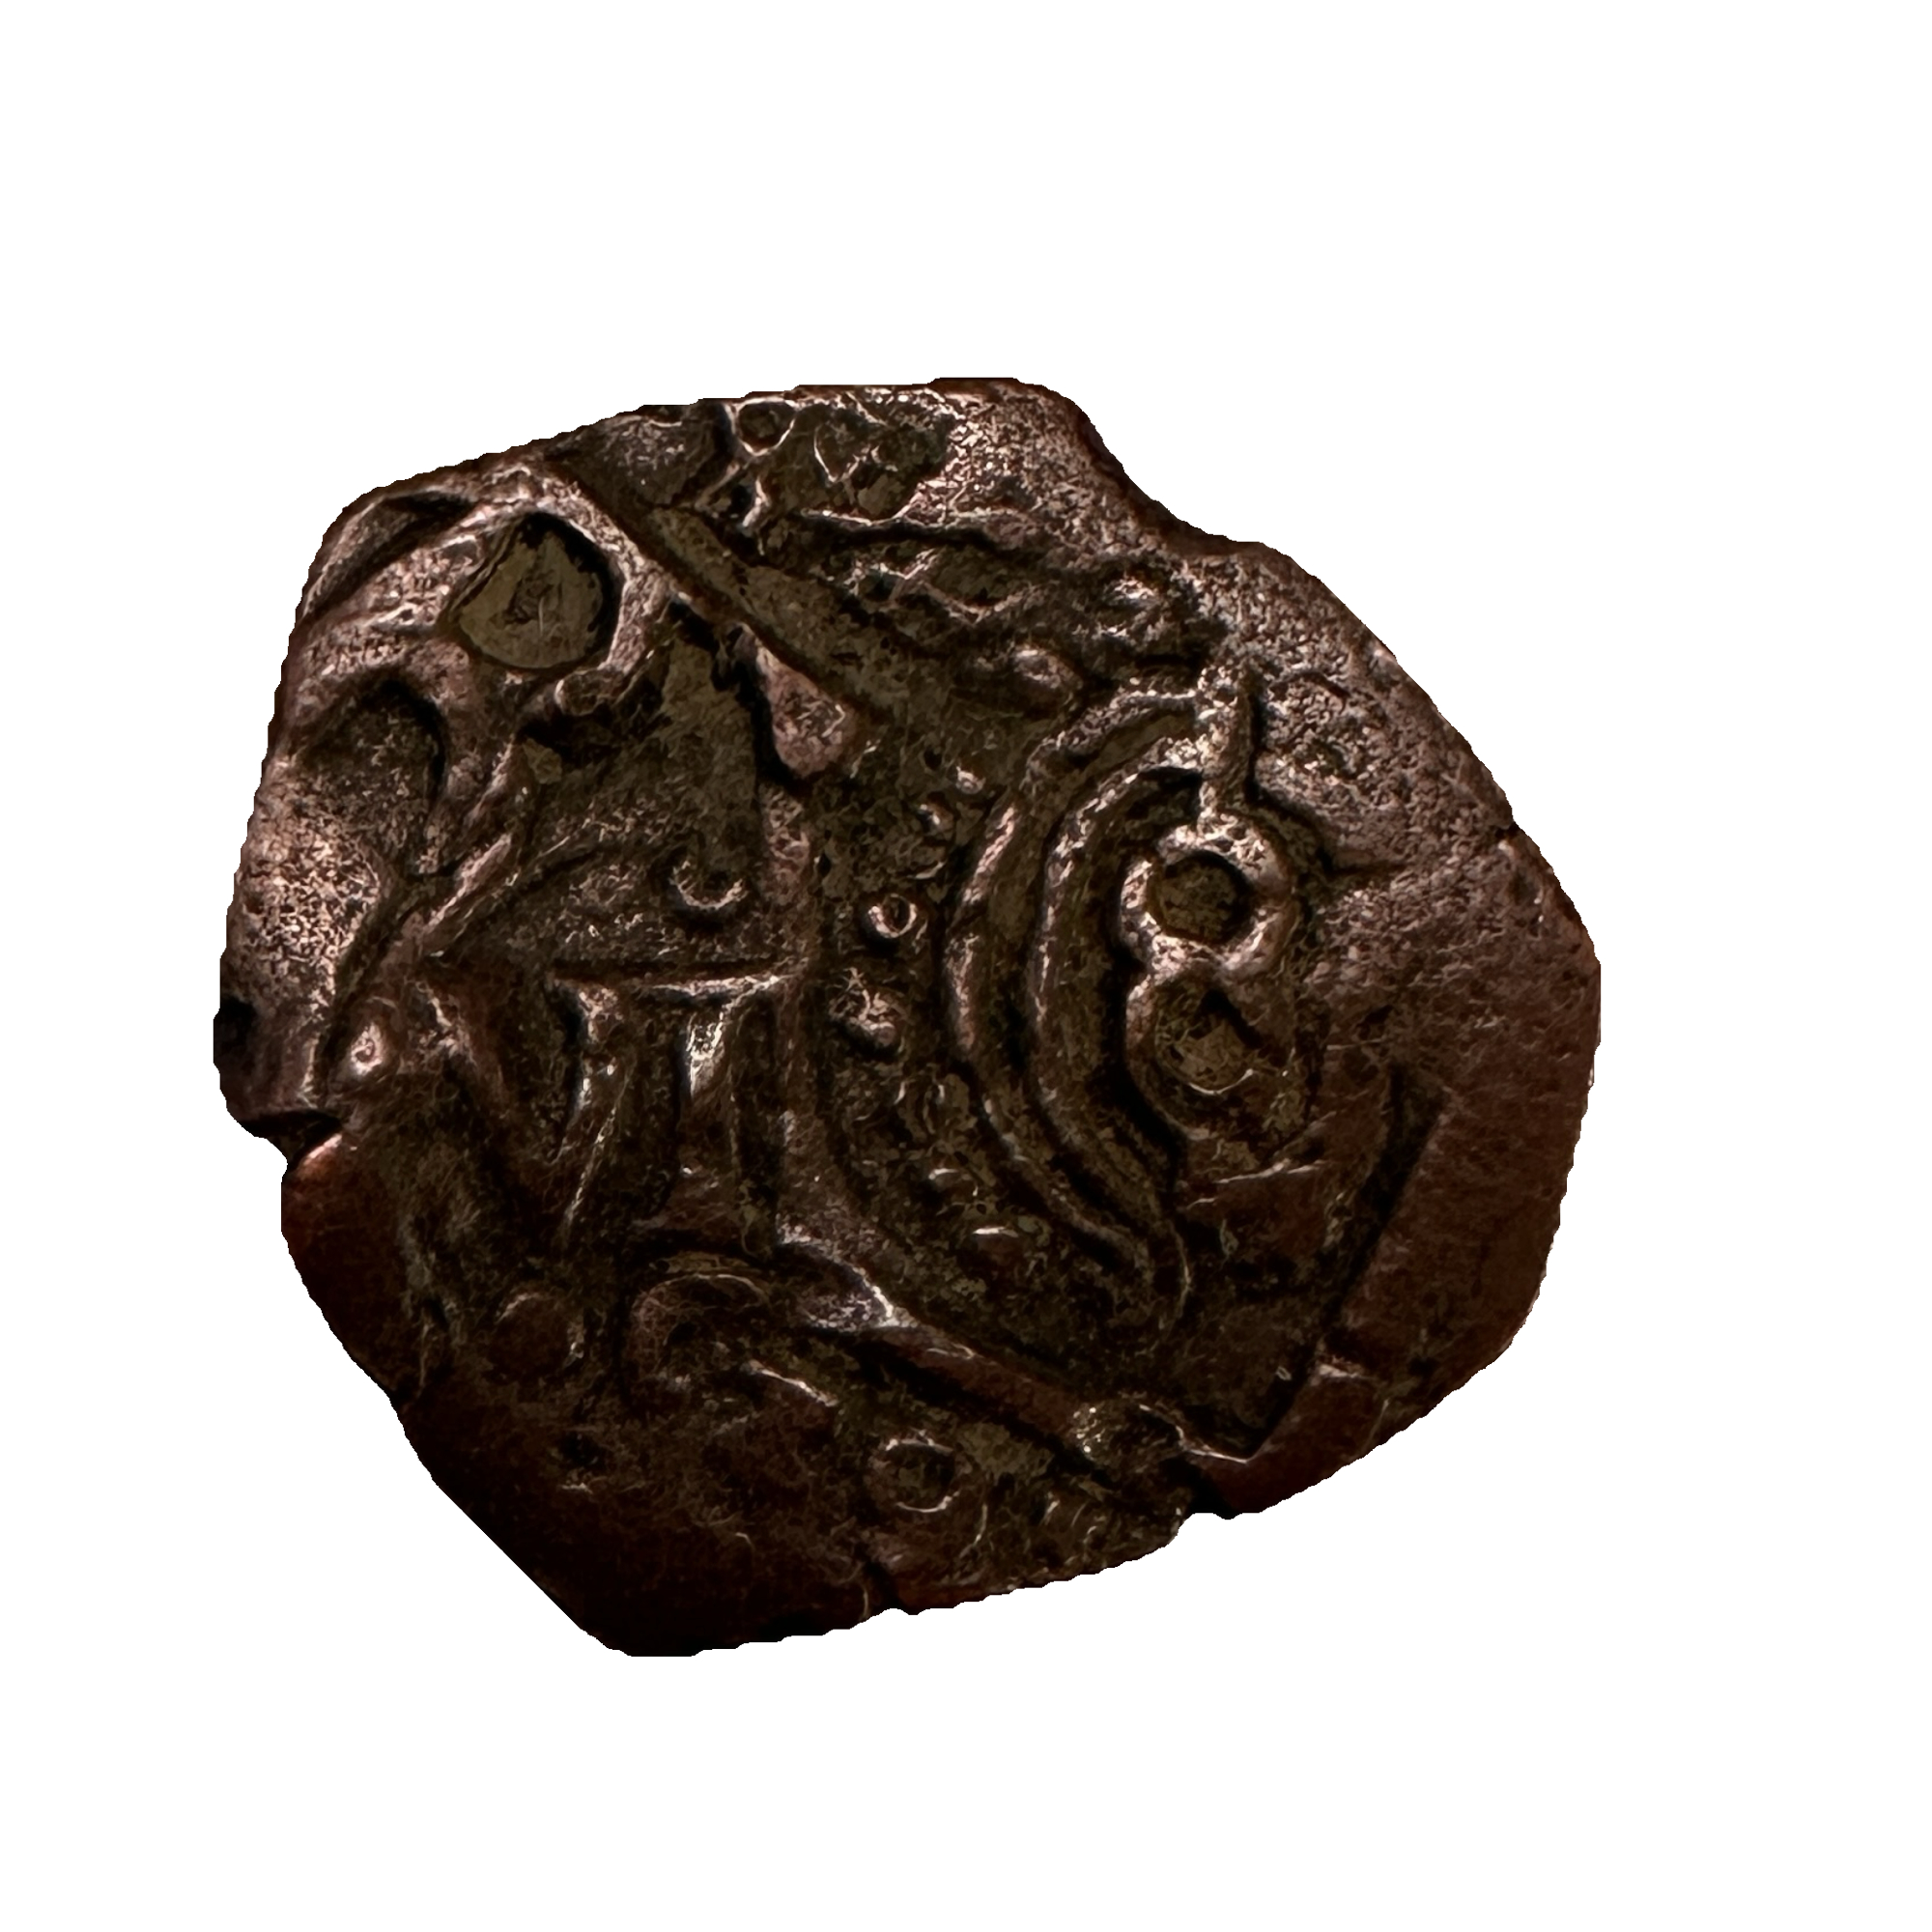 Look at the amazing detail on this spanish pirate coin. This 17th century cob has a defined figure 8.